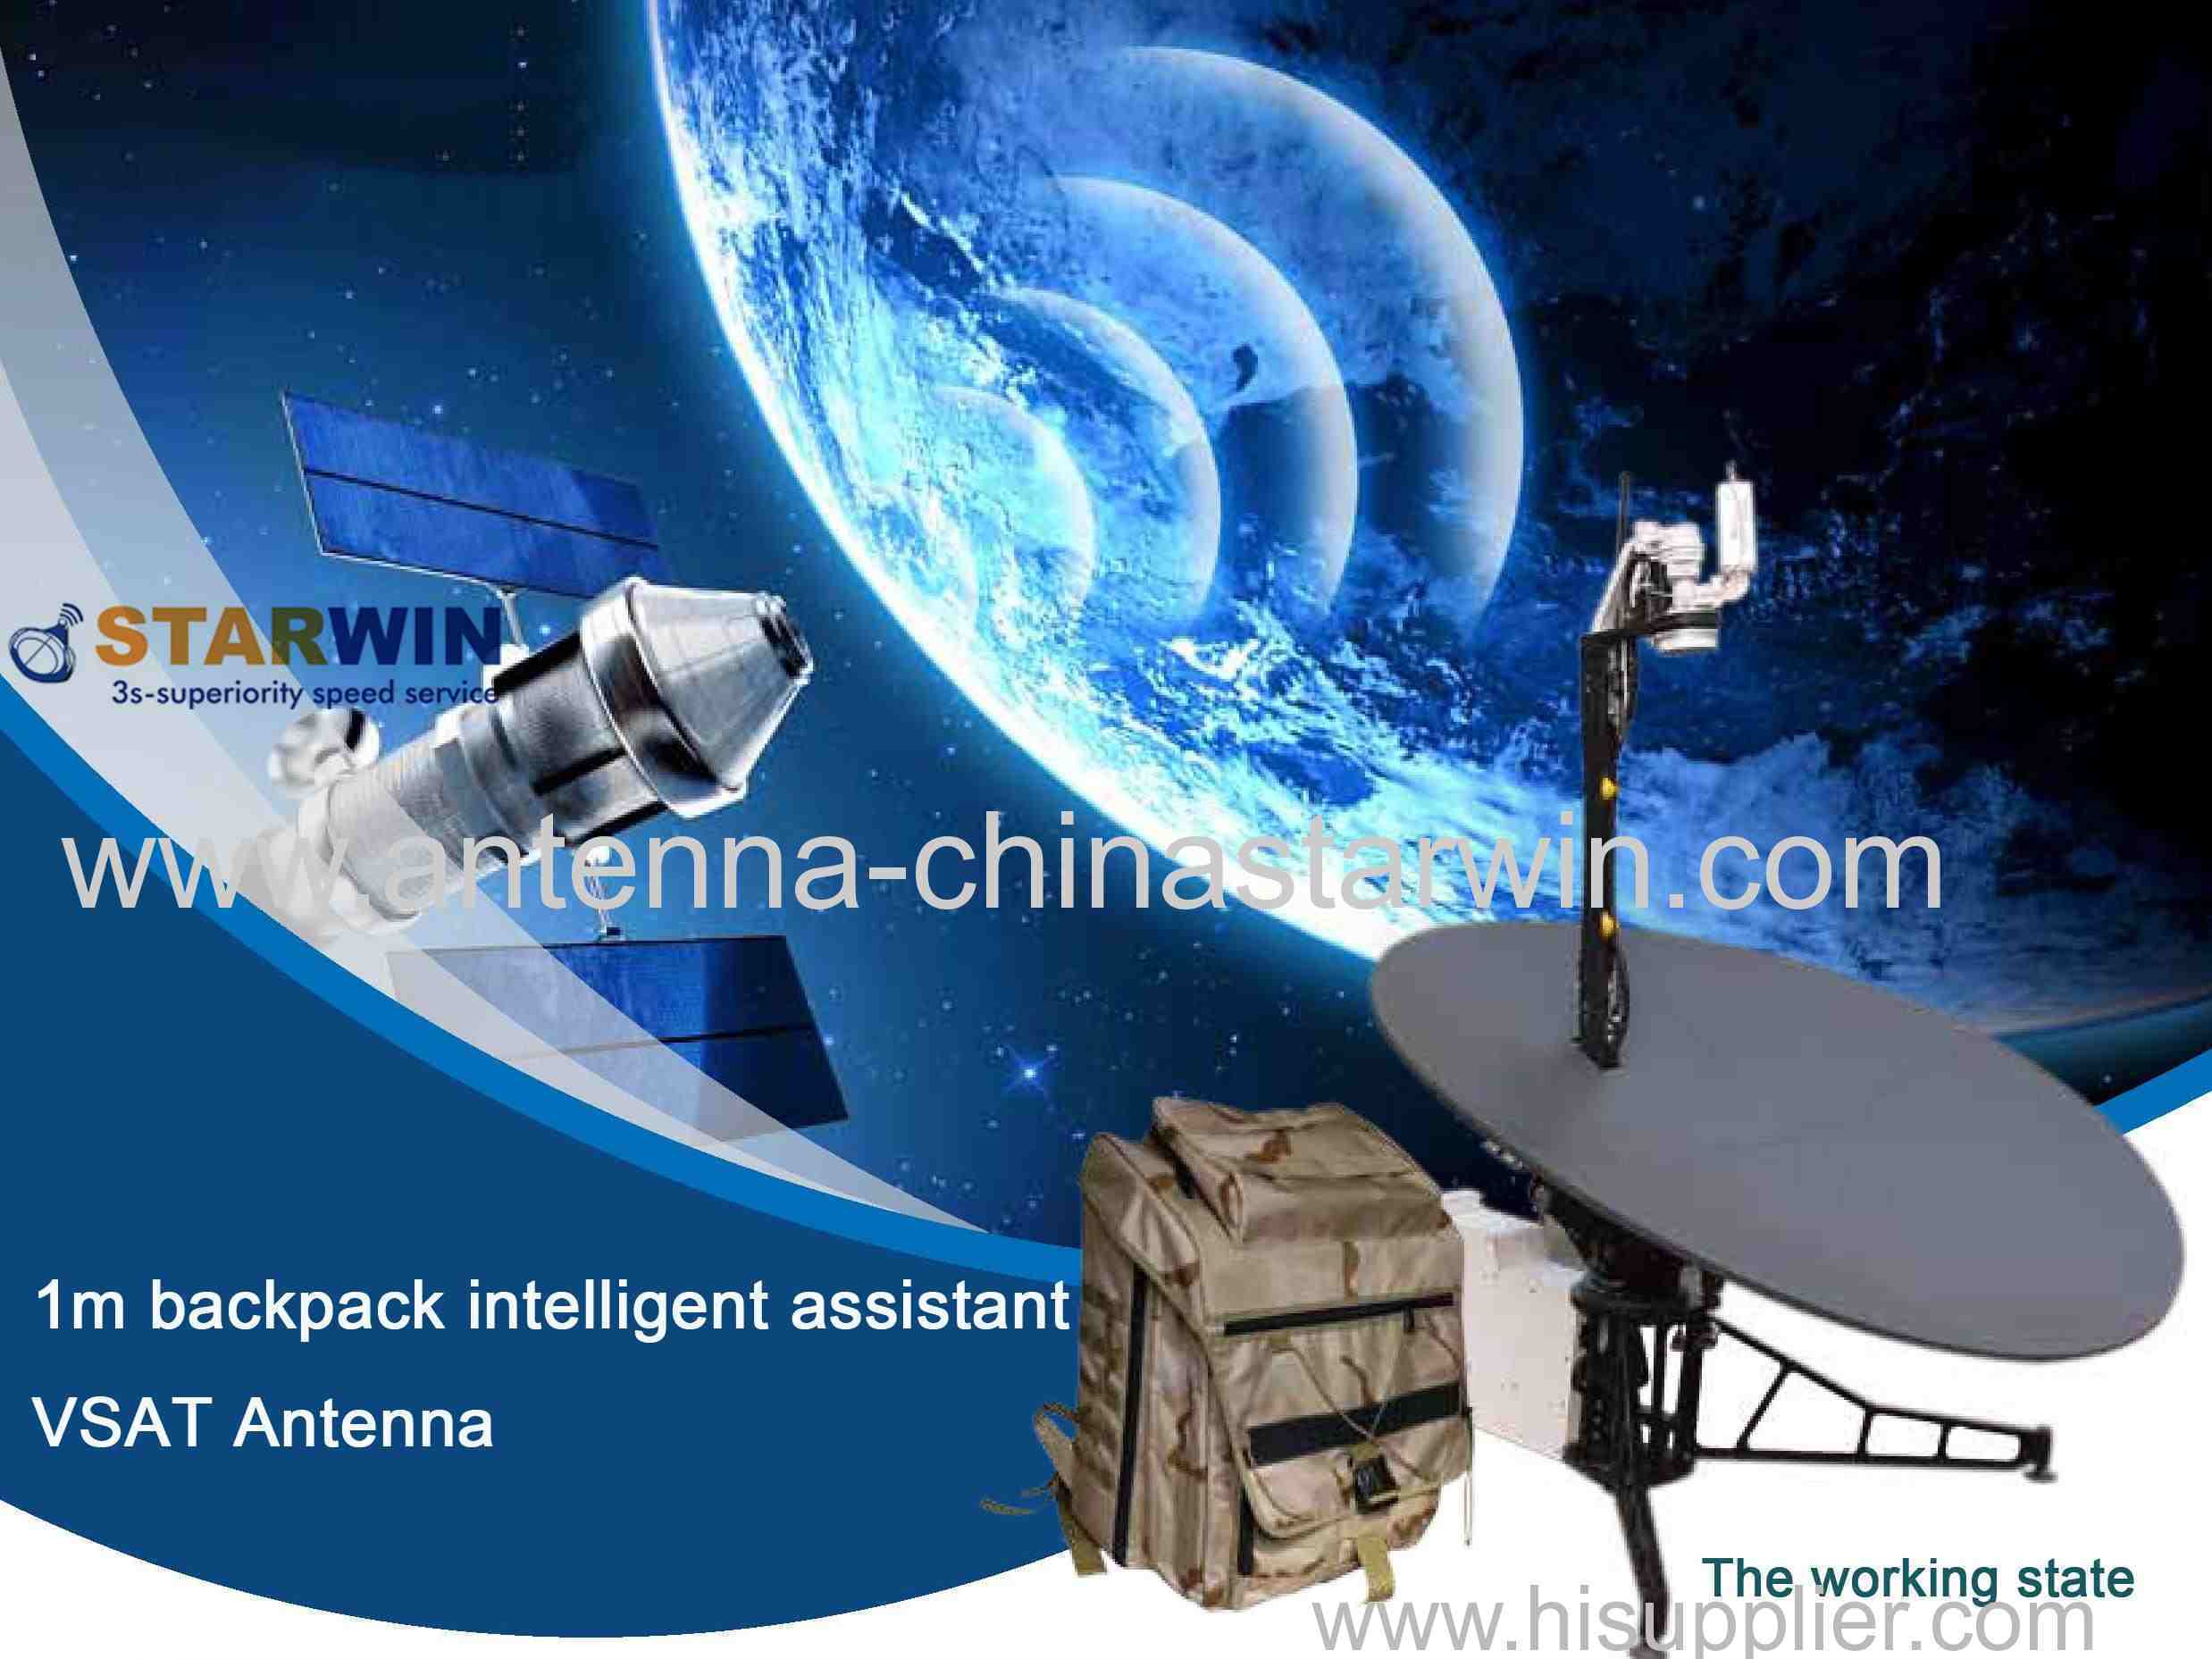 The Starwin 1m backpack intelligent assistant antenna